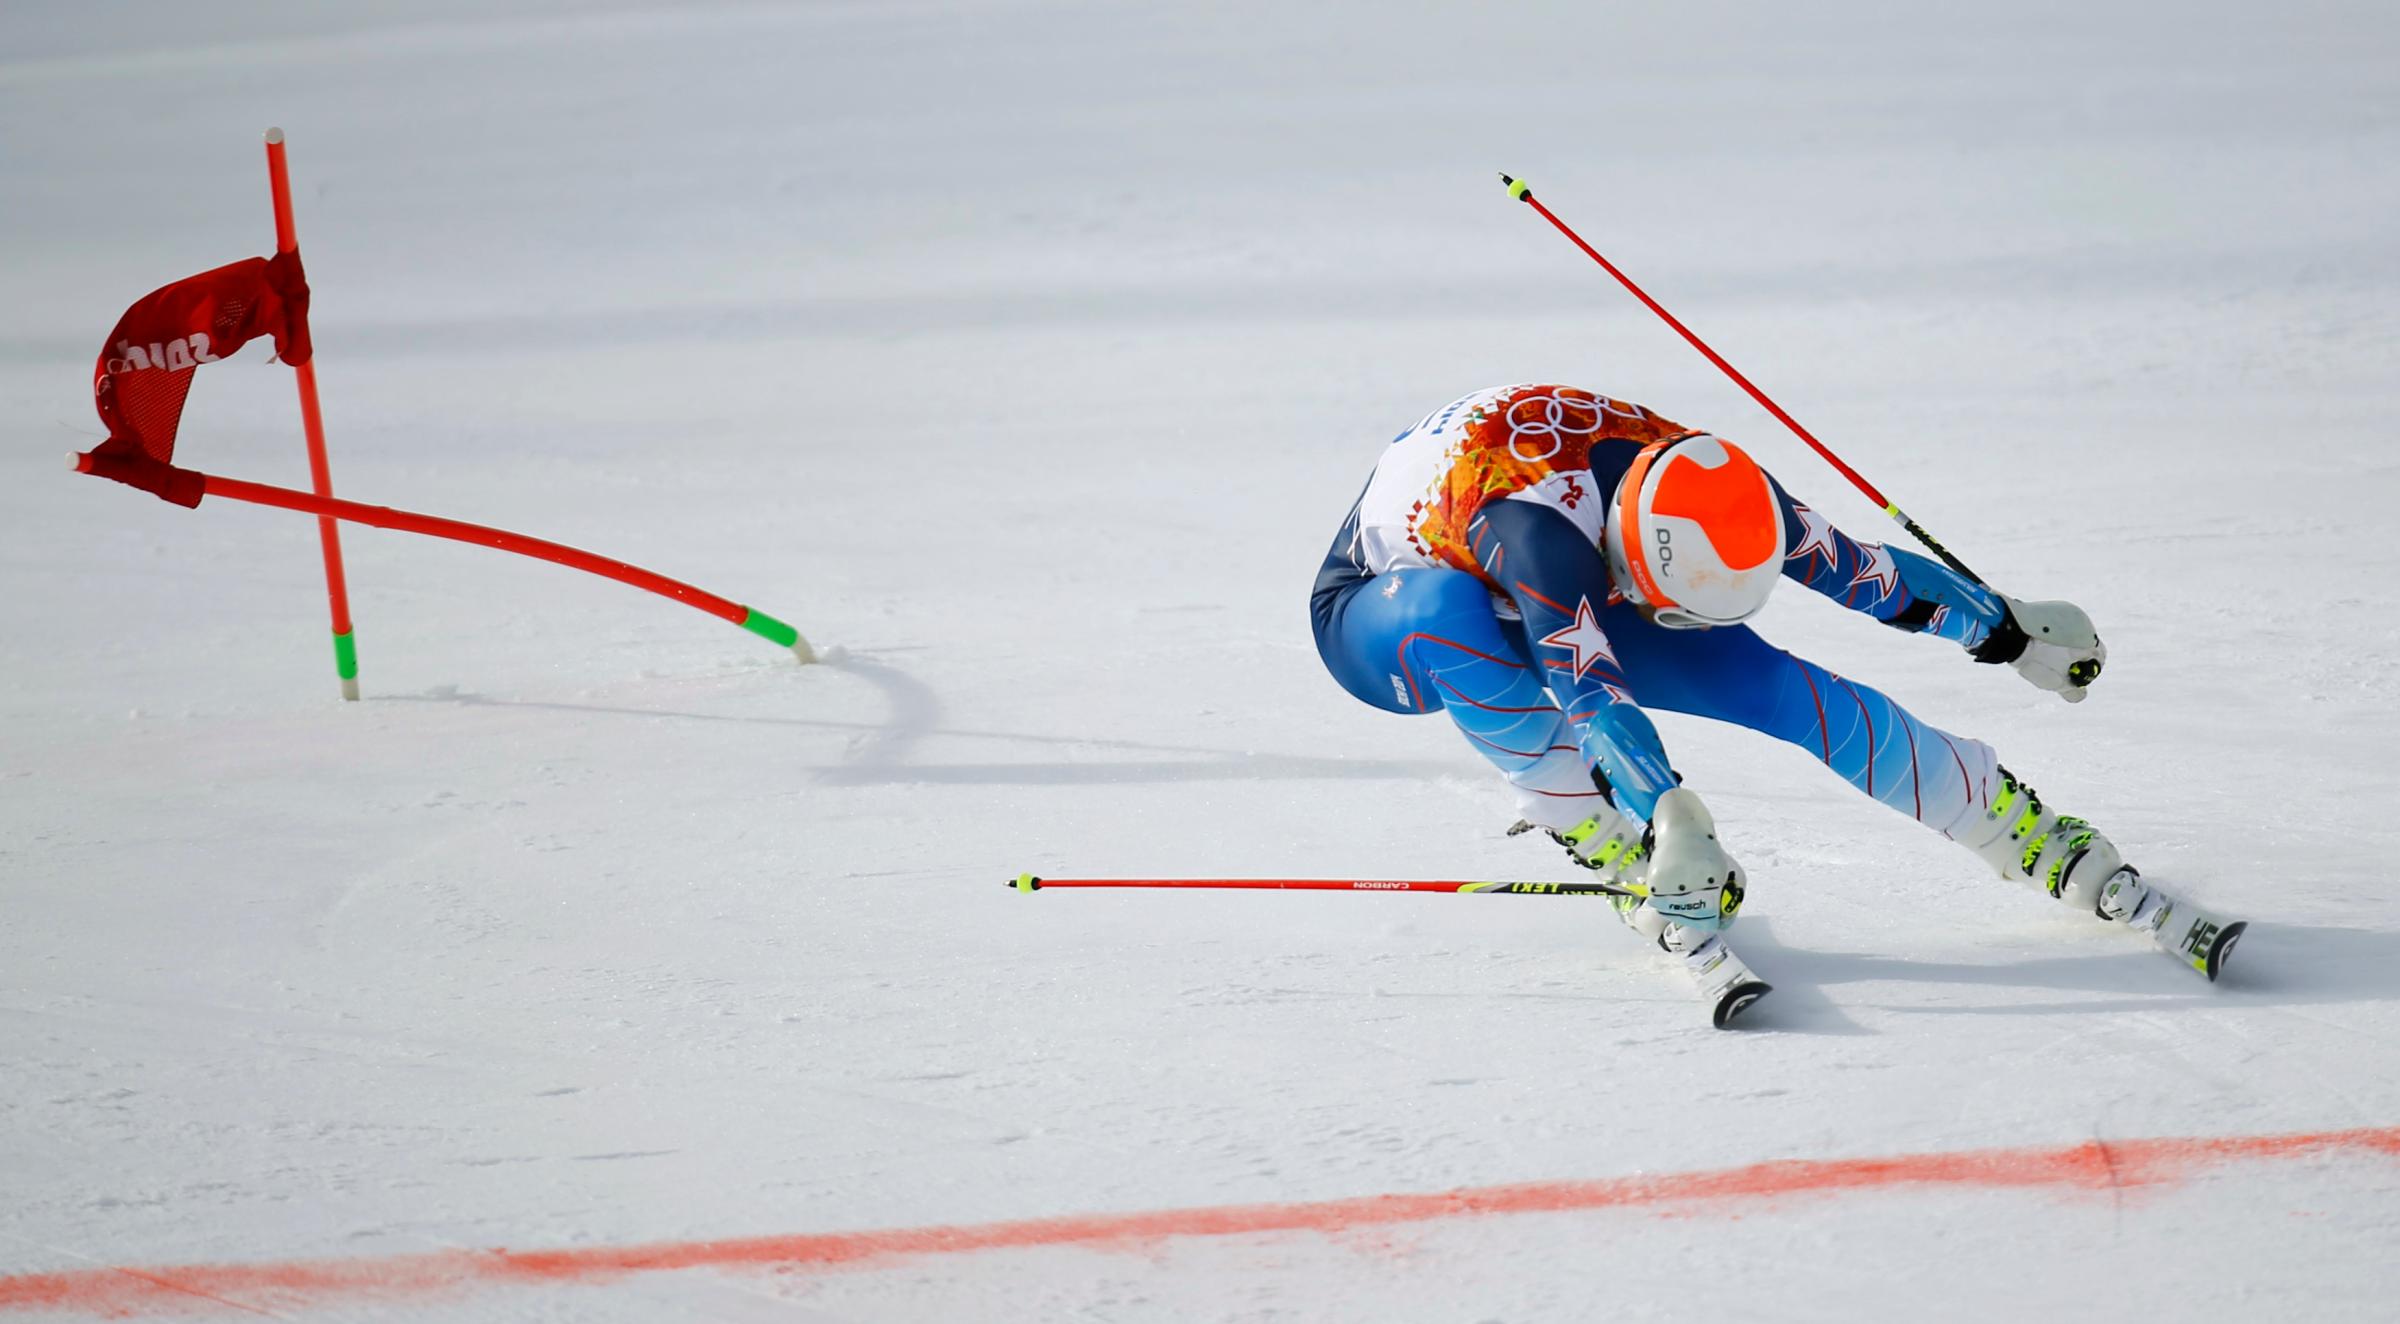 Bode Miller of the U.S. lunges towards the finish line during the first run of the men's alpine skiing giant slalom event.